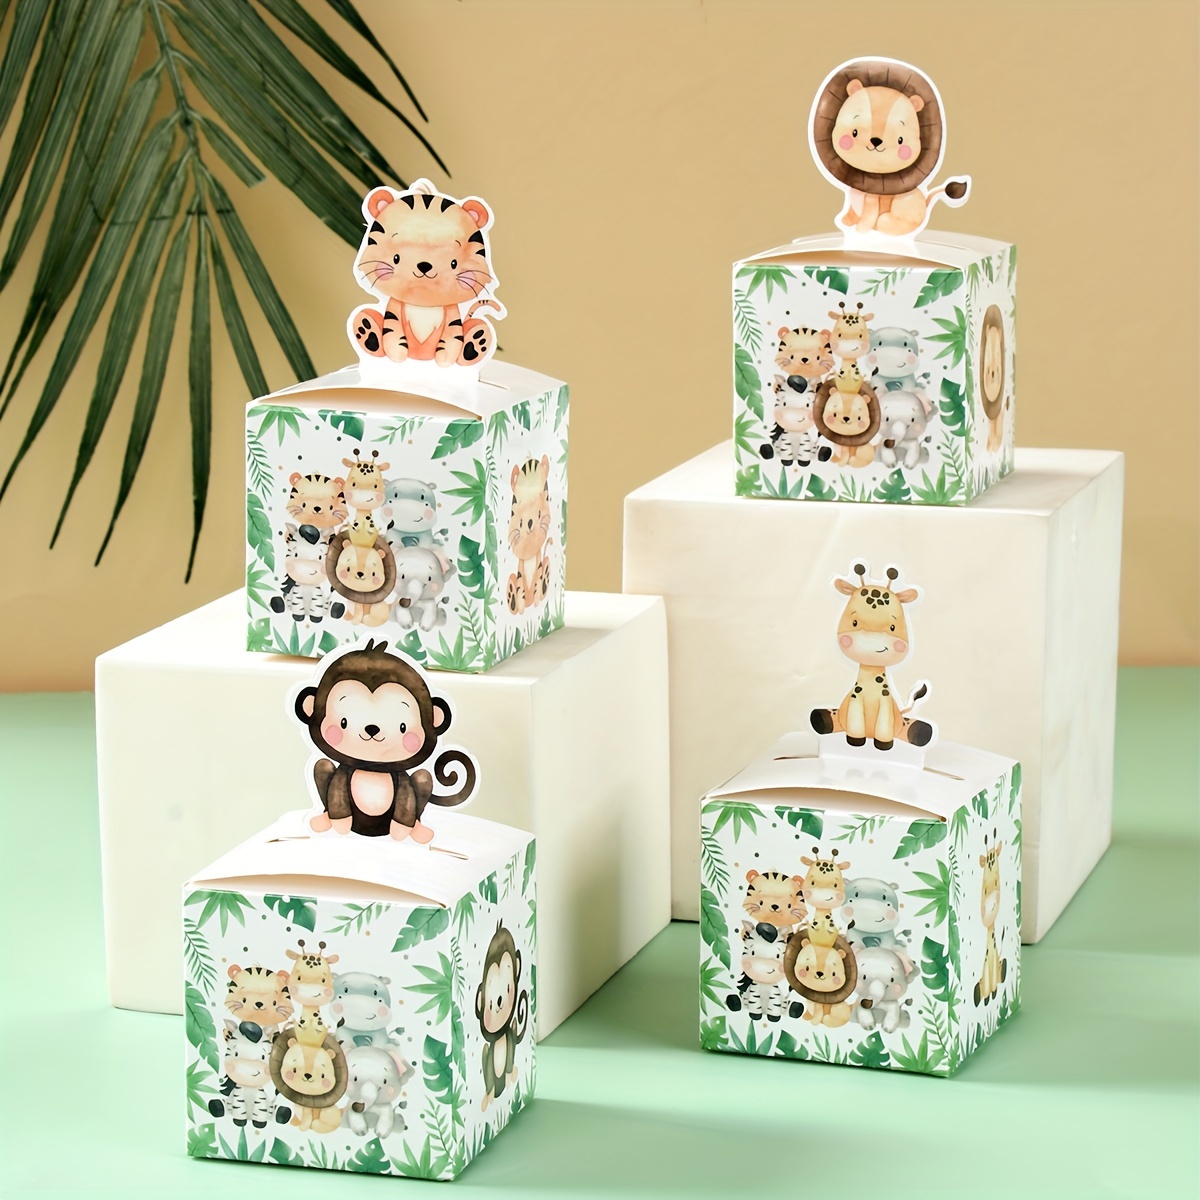 

24pcs, Jungle Animal Themed Paper Candy Box, Zoo Animal Party Gift Box Birthday Party Candy Box Gift Box Therapy Box, Hunting Jungle Theme Birthday Party Party Supplies Decoration Gifts